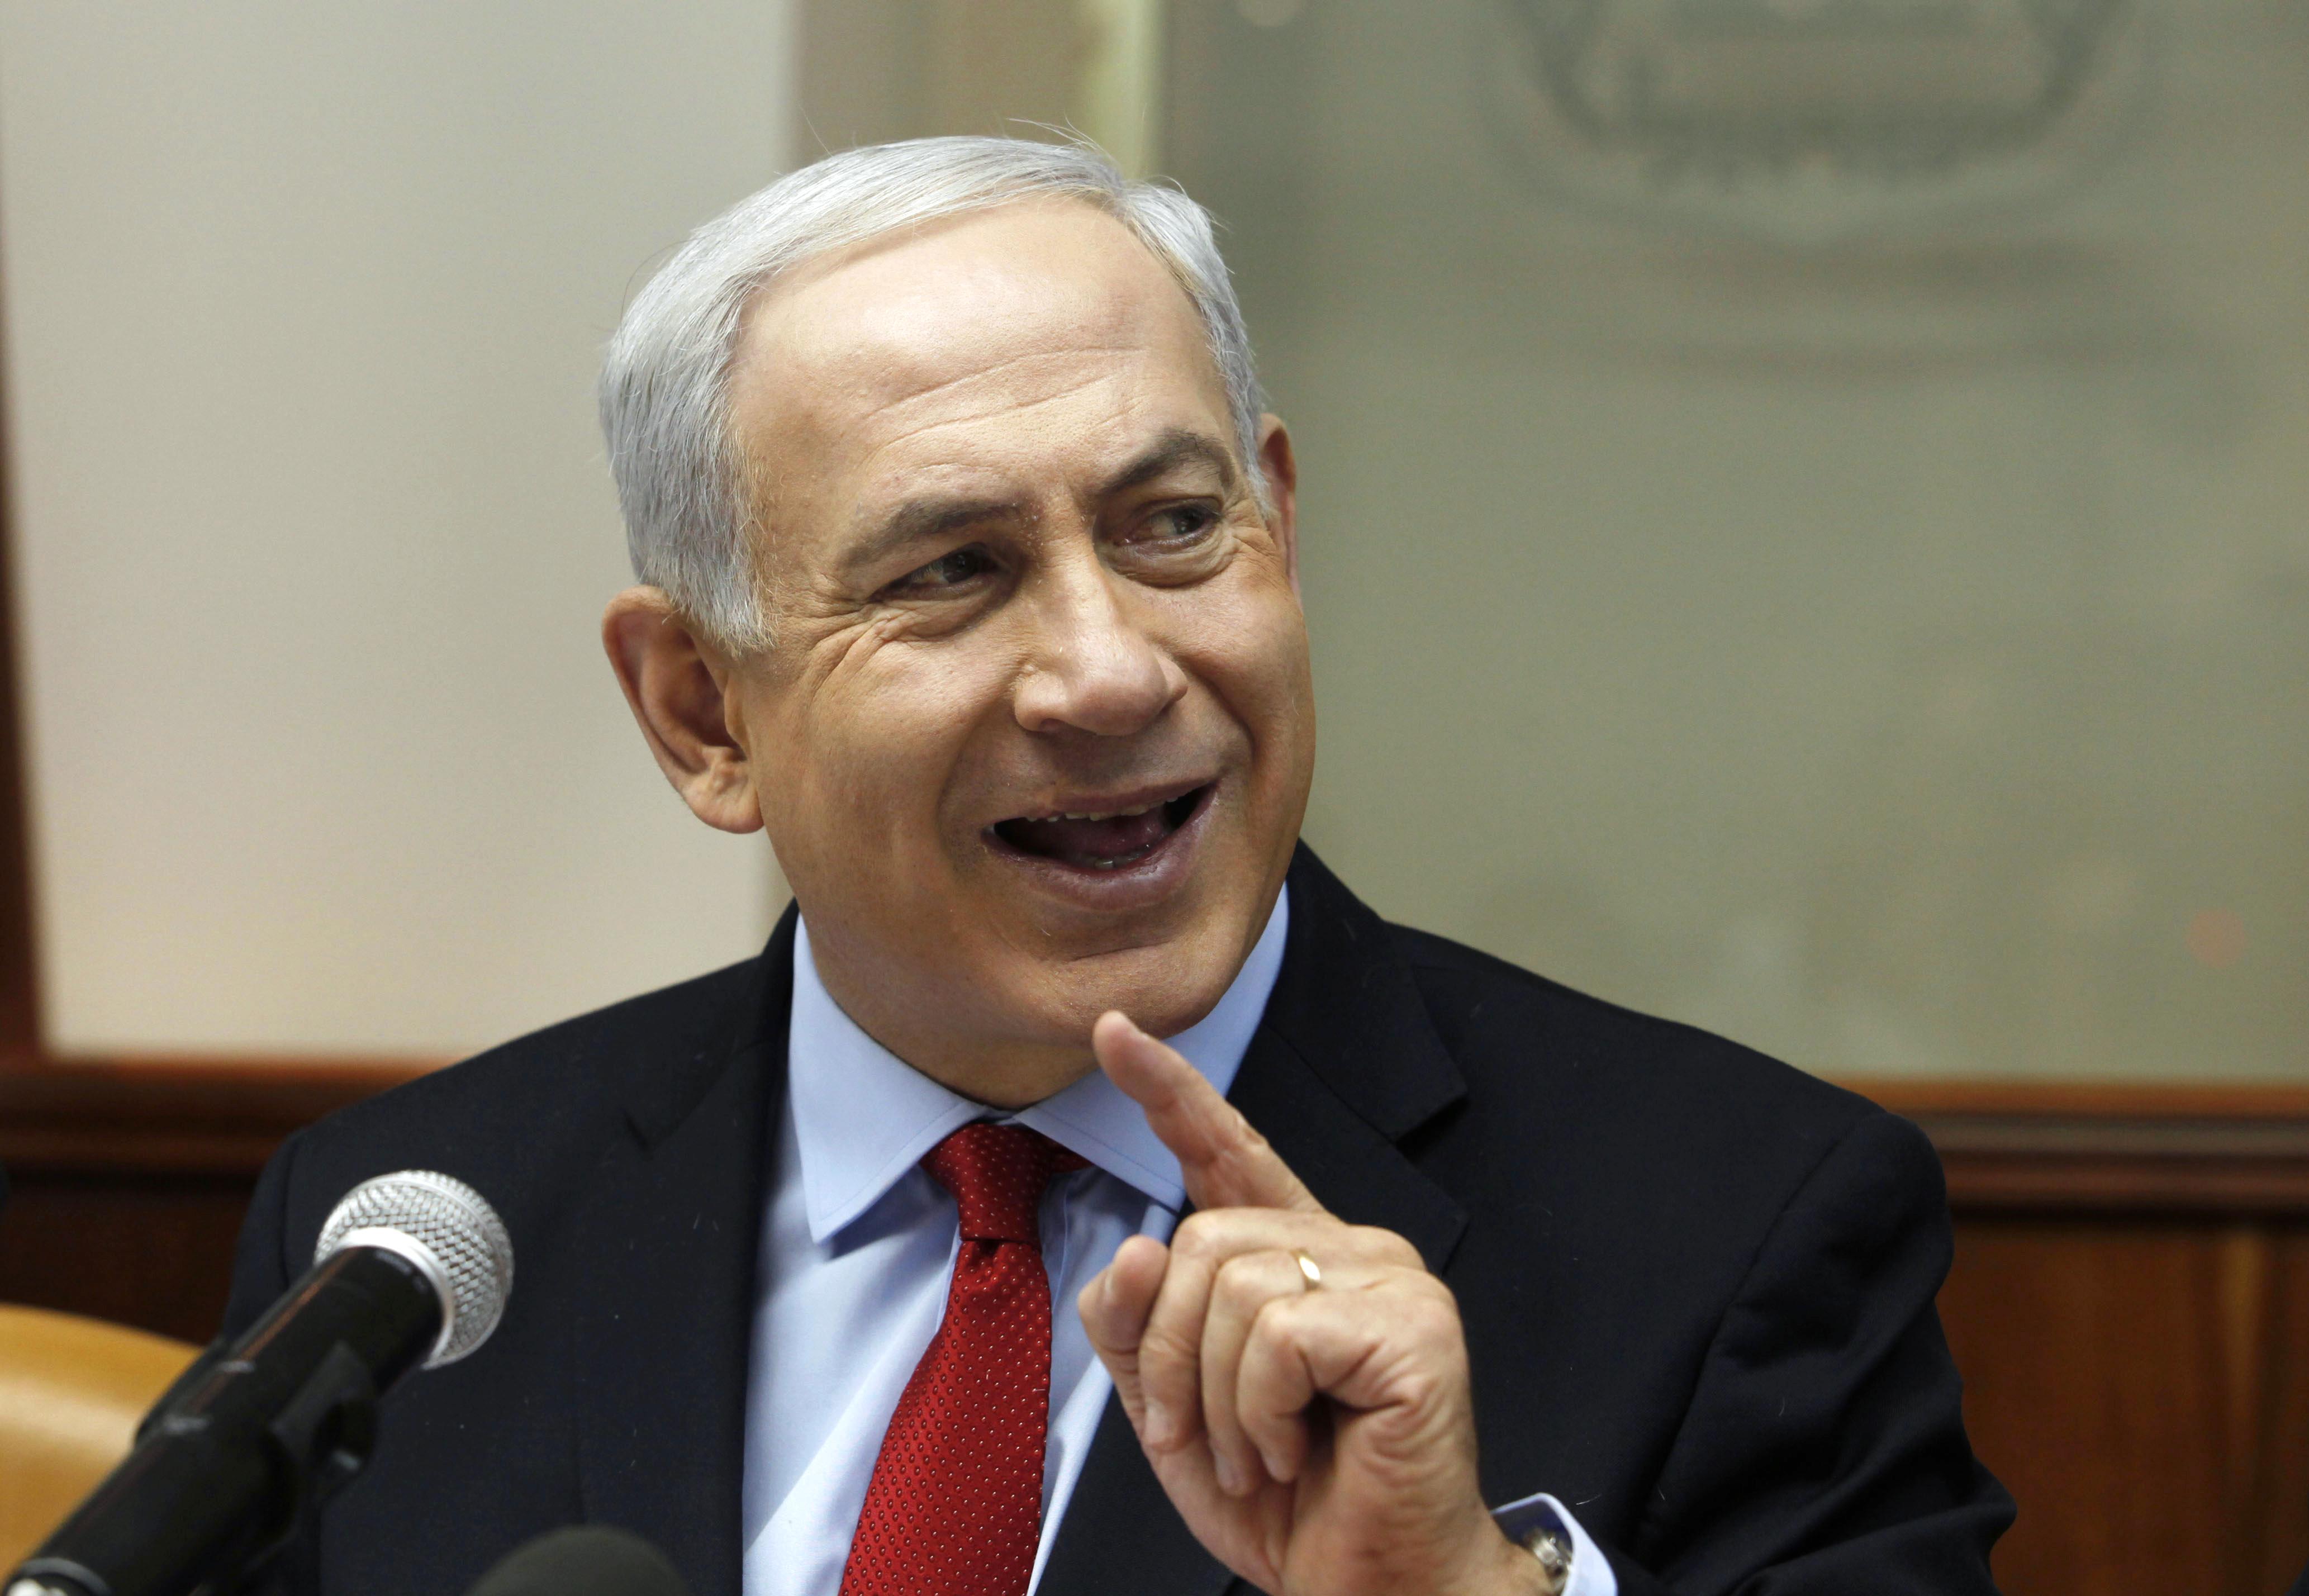 Israel PM imposes silence on UN over Iran deal